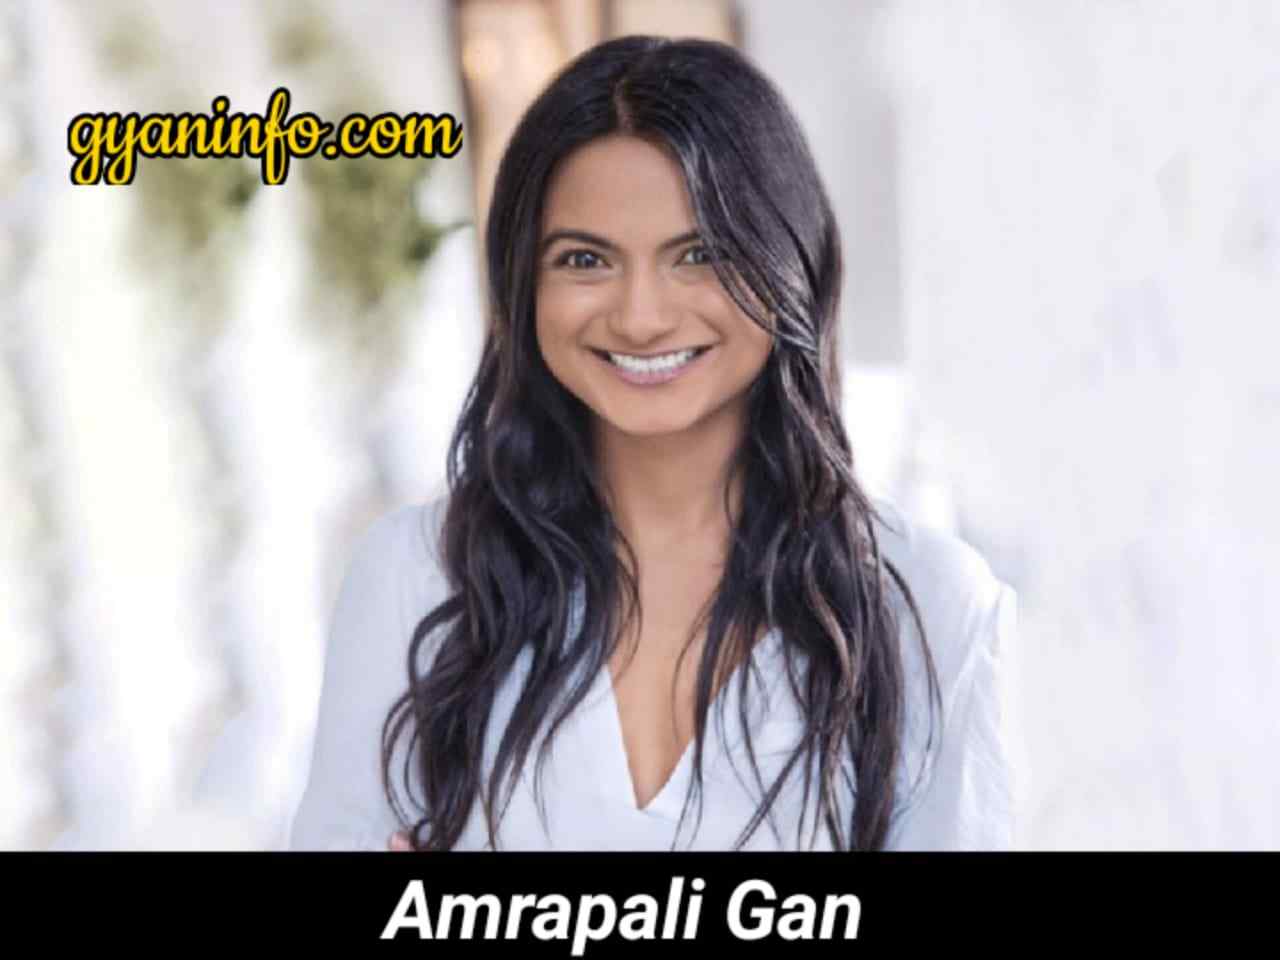 Amrapali Gan [Onlyfans CEO] Height, Age, Weight, Body Measurements, Relationship, Career, Boyfriend, Husband, Education, Net Worth, Wiki & More